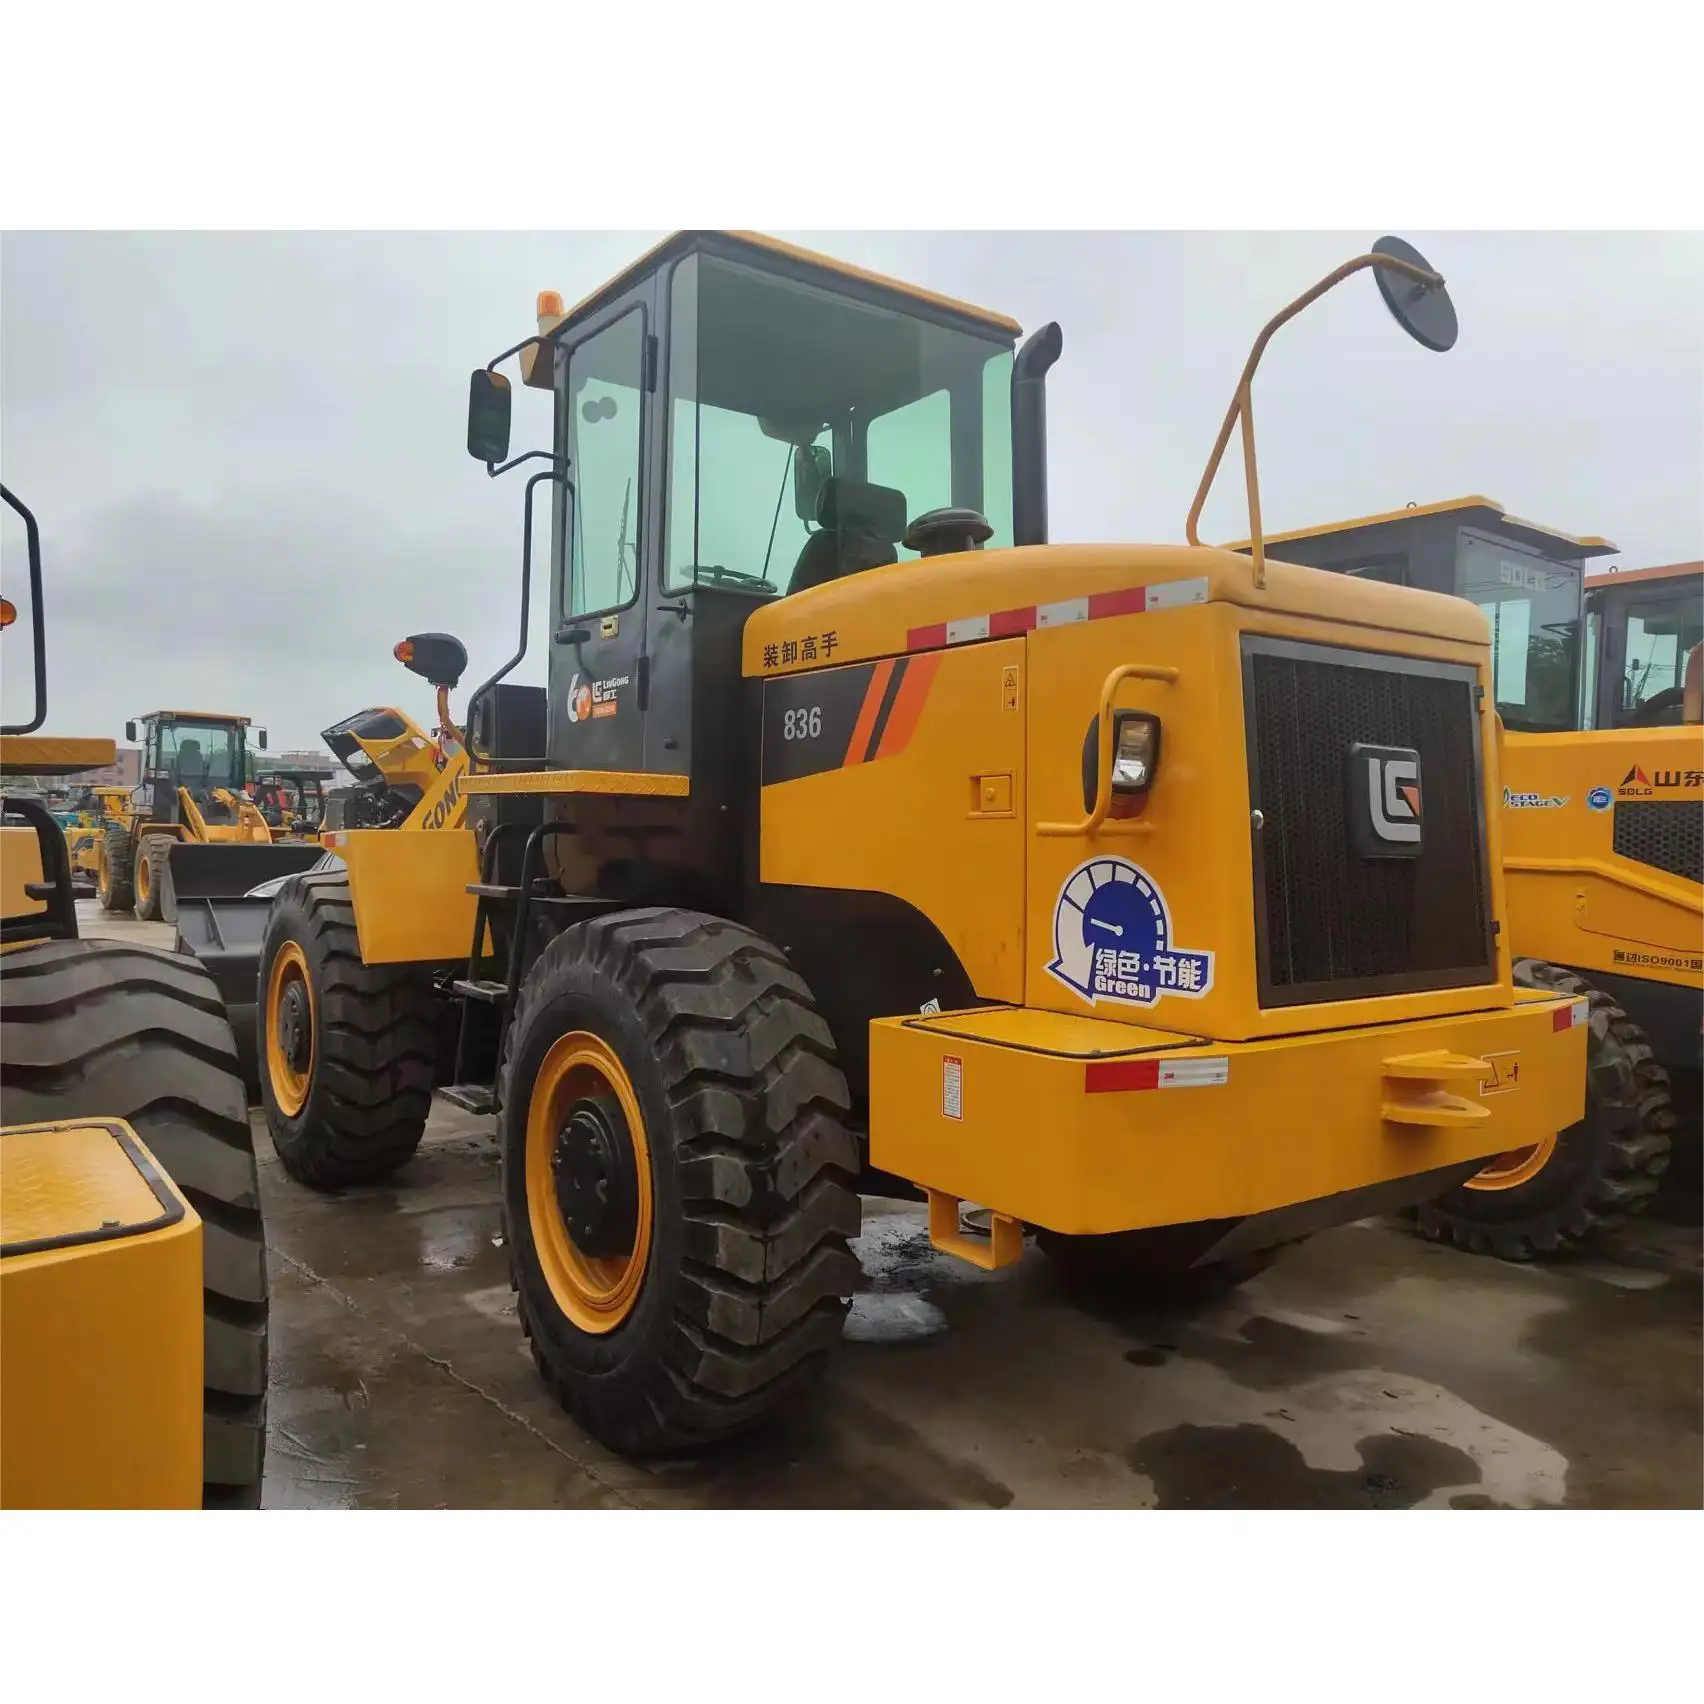 Used Loaders Used Wheel Loader Liugong836 Second Hand 90%new Chinese Made Wheel Used Loader Road Machine For Liugong 836